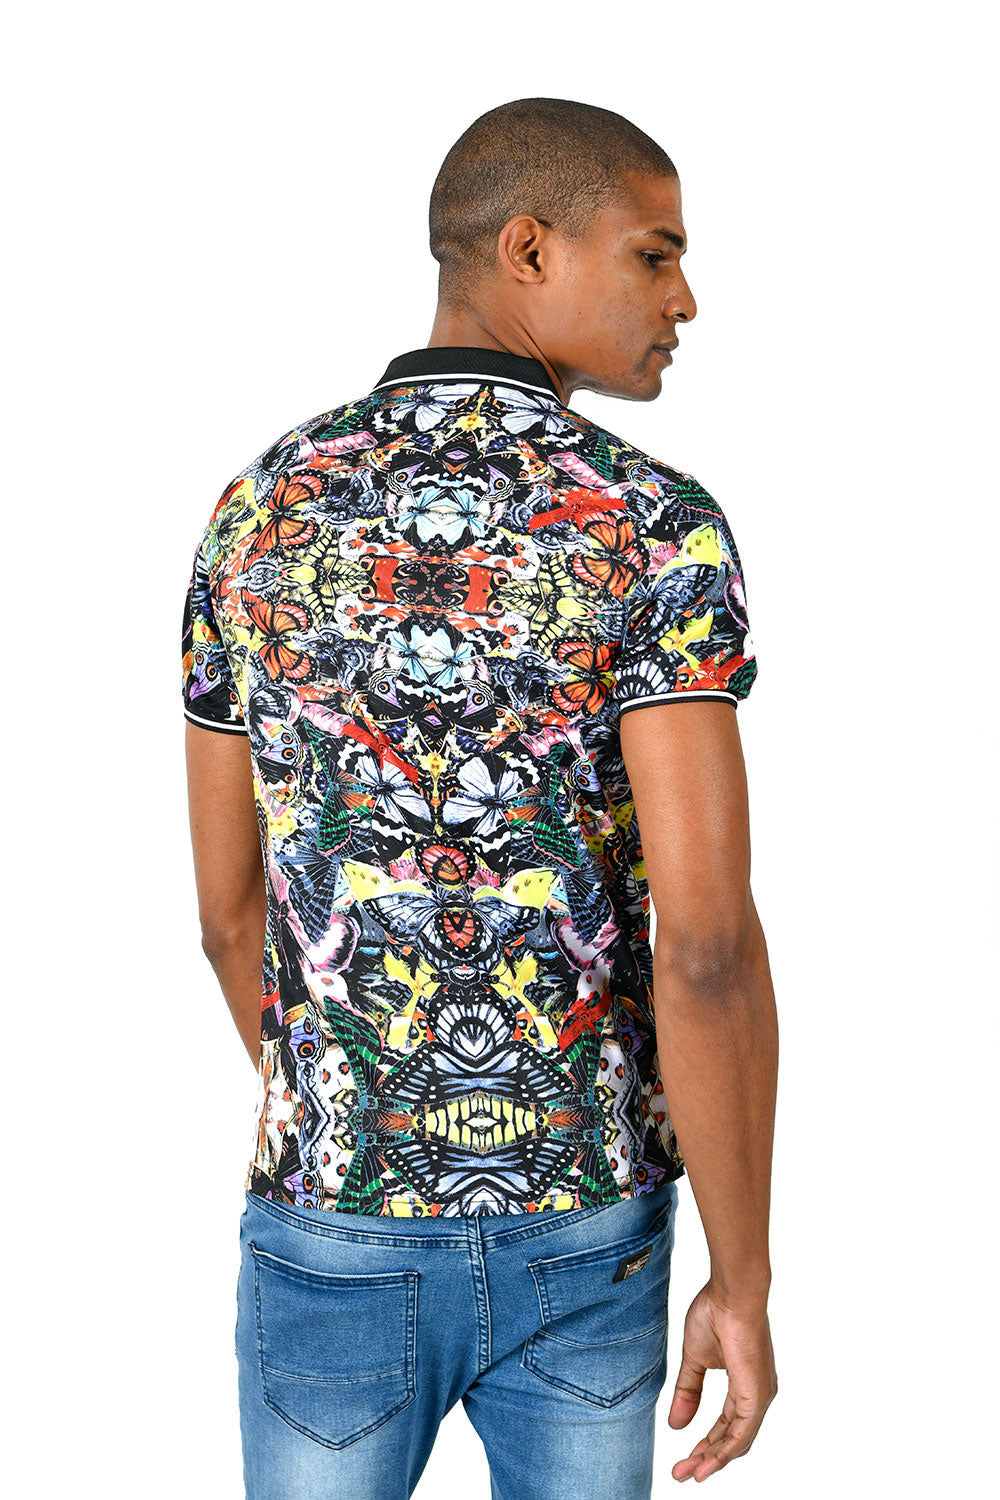 Barabas men's Floral Butterfly Prints Graphic Tee Polo Shirts BD35